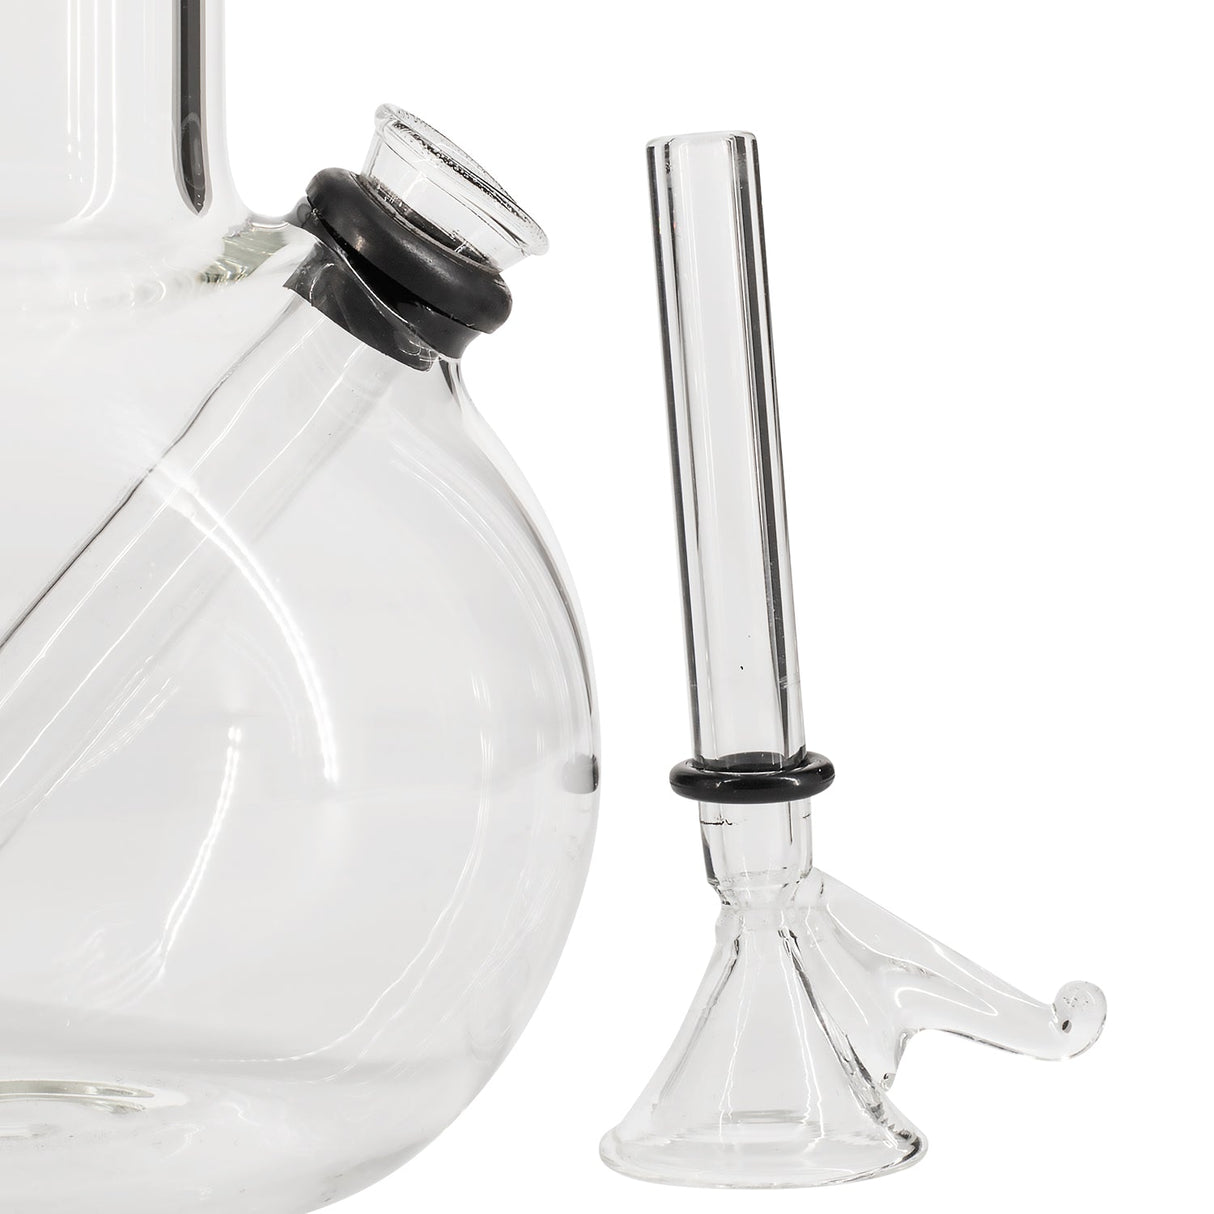 LA Pipes Clear Glass Basic Water Pipe with 45 Degree Grommet Joint - Close-up Side View